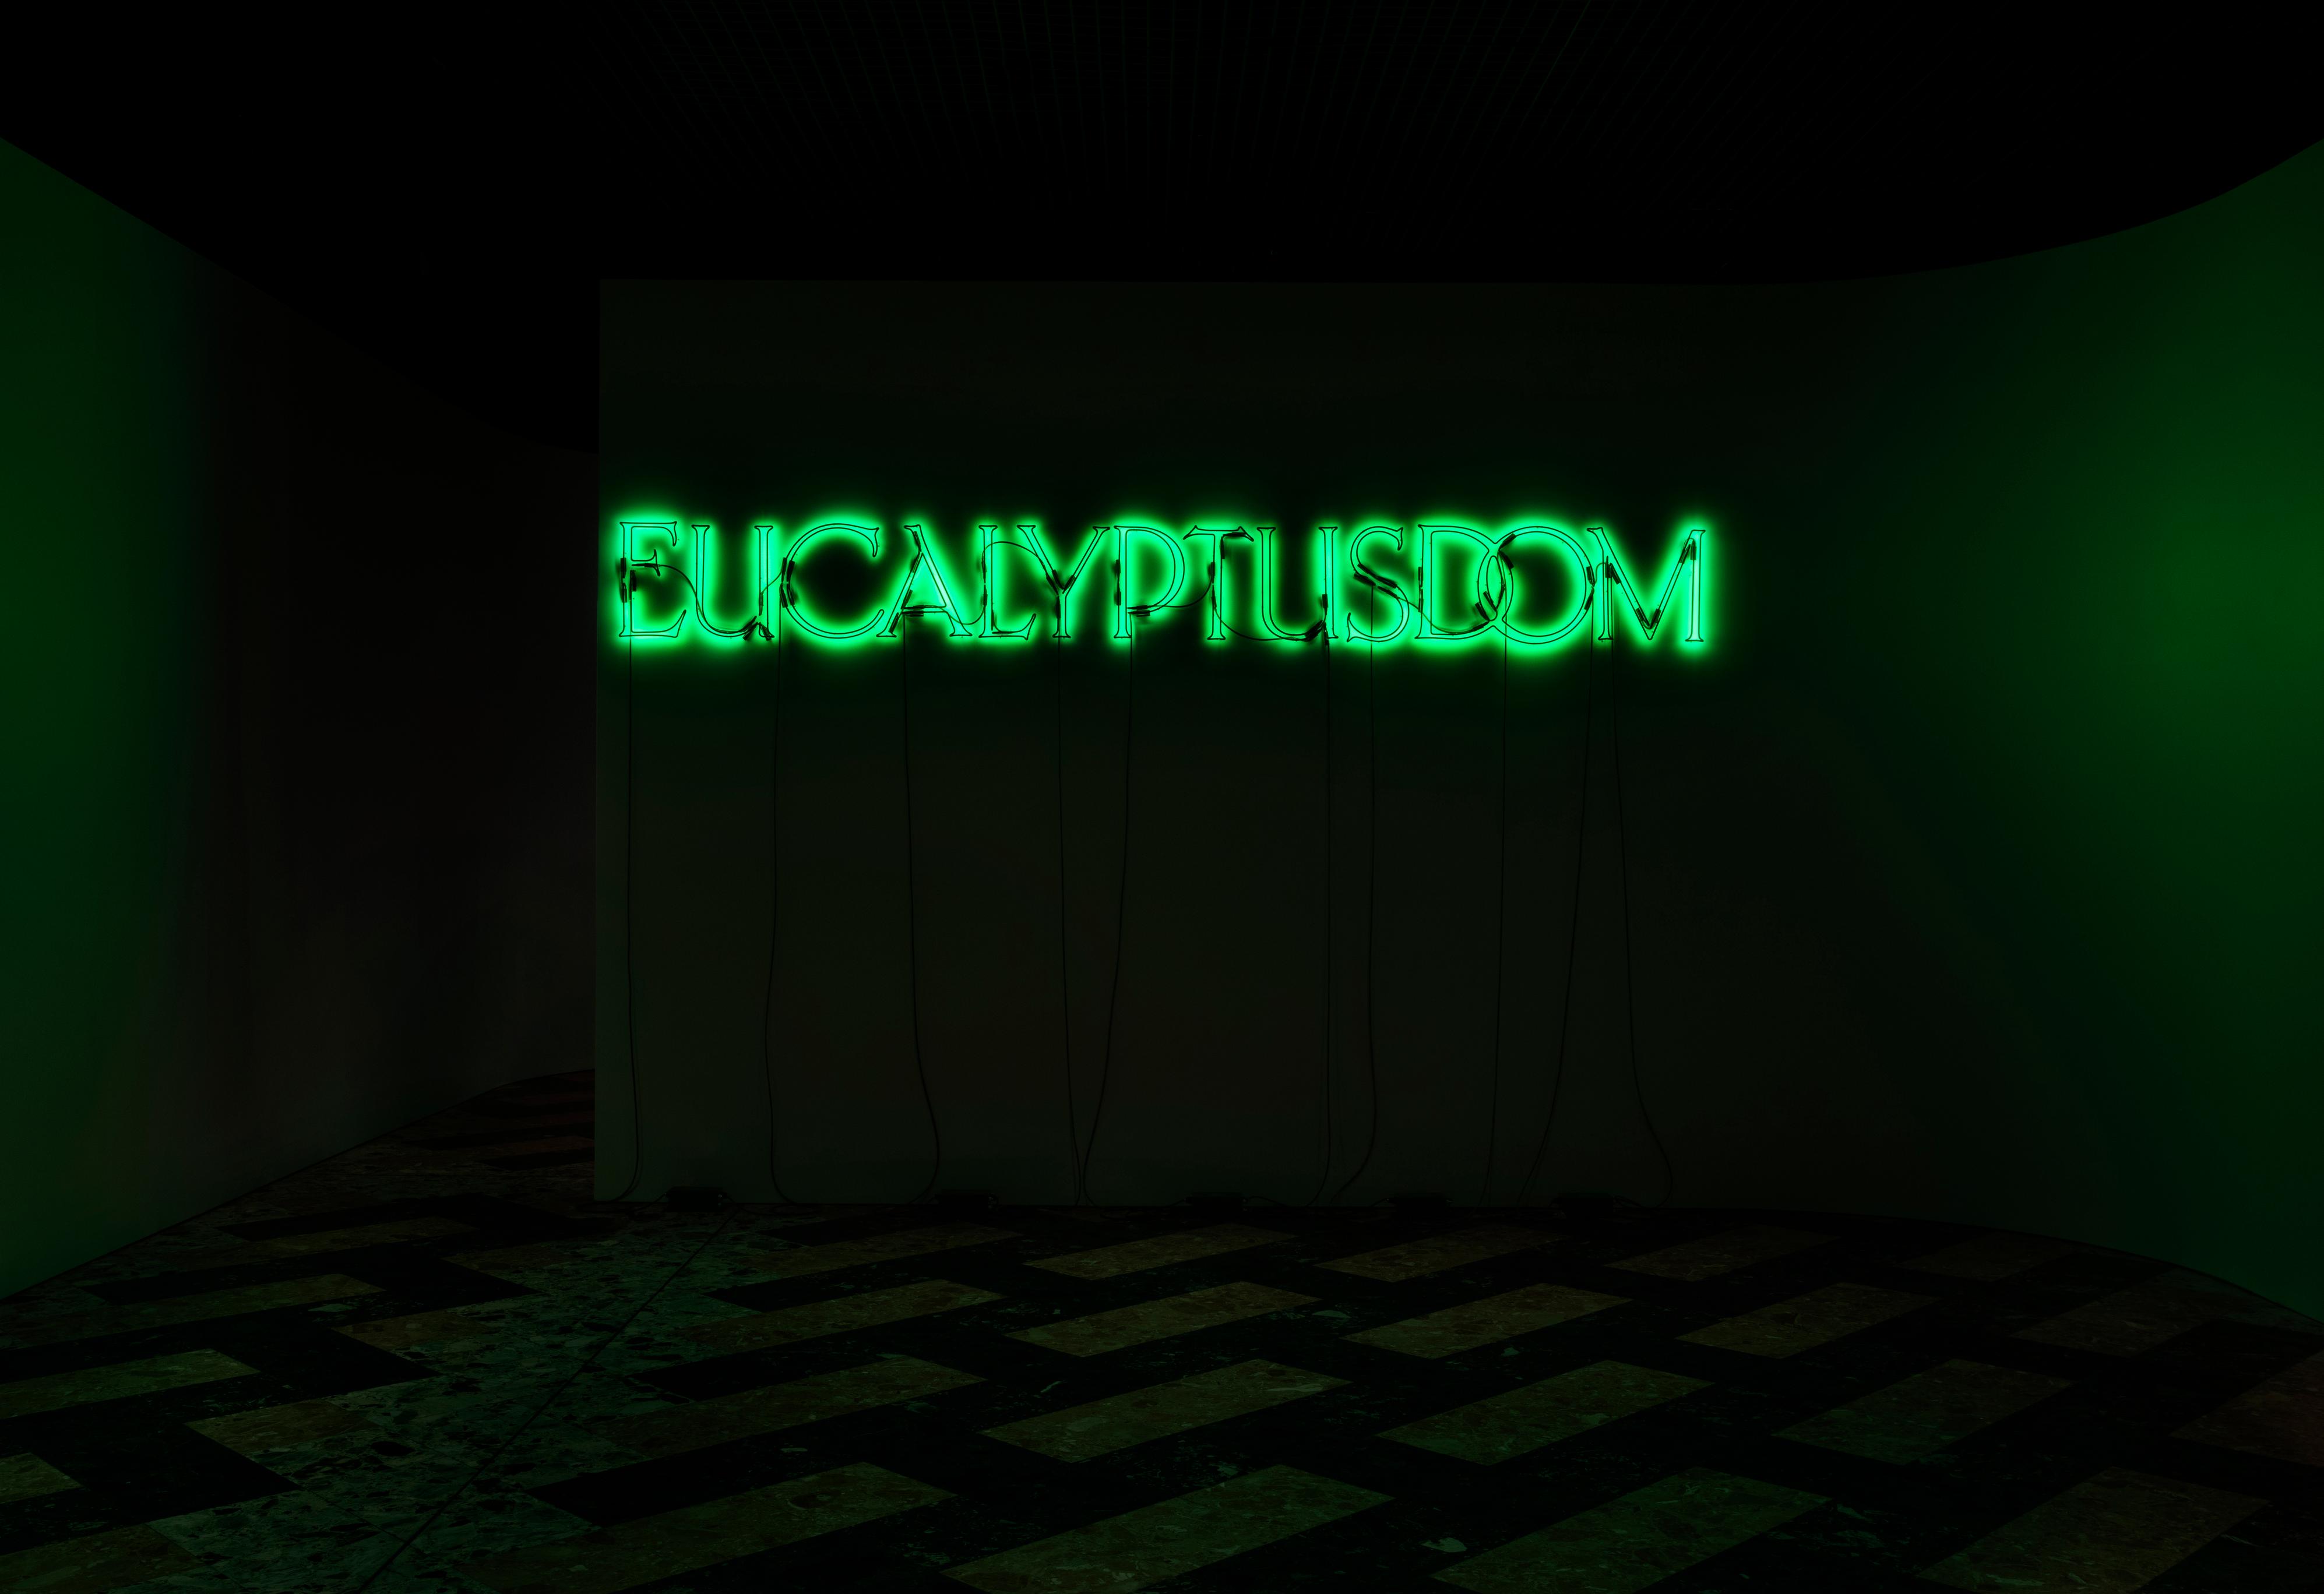 eucalyptusdom title sits on a wall in a neon green light